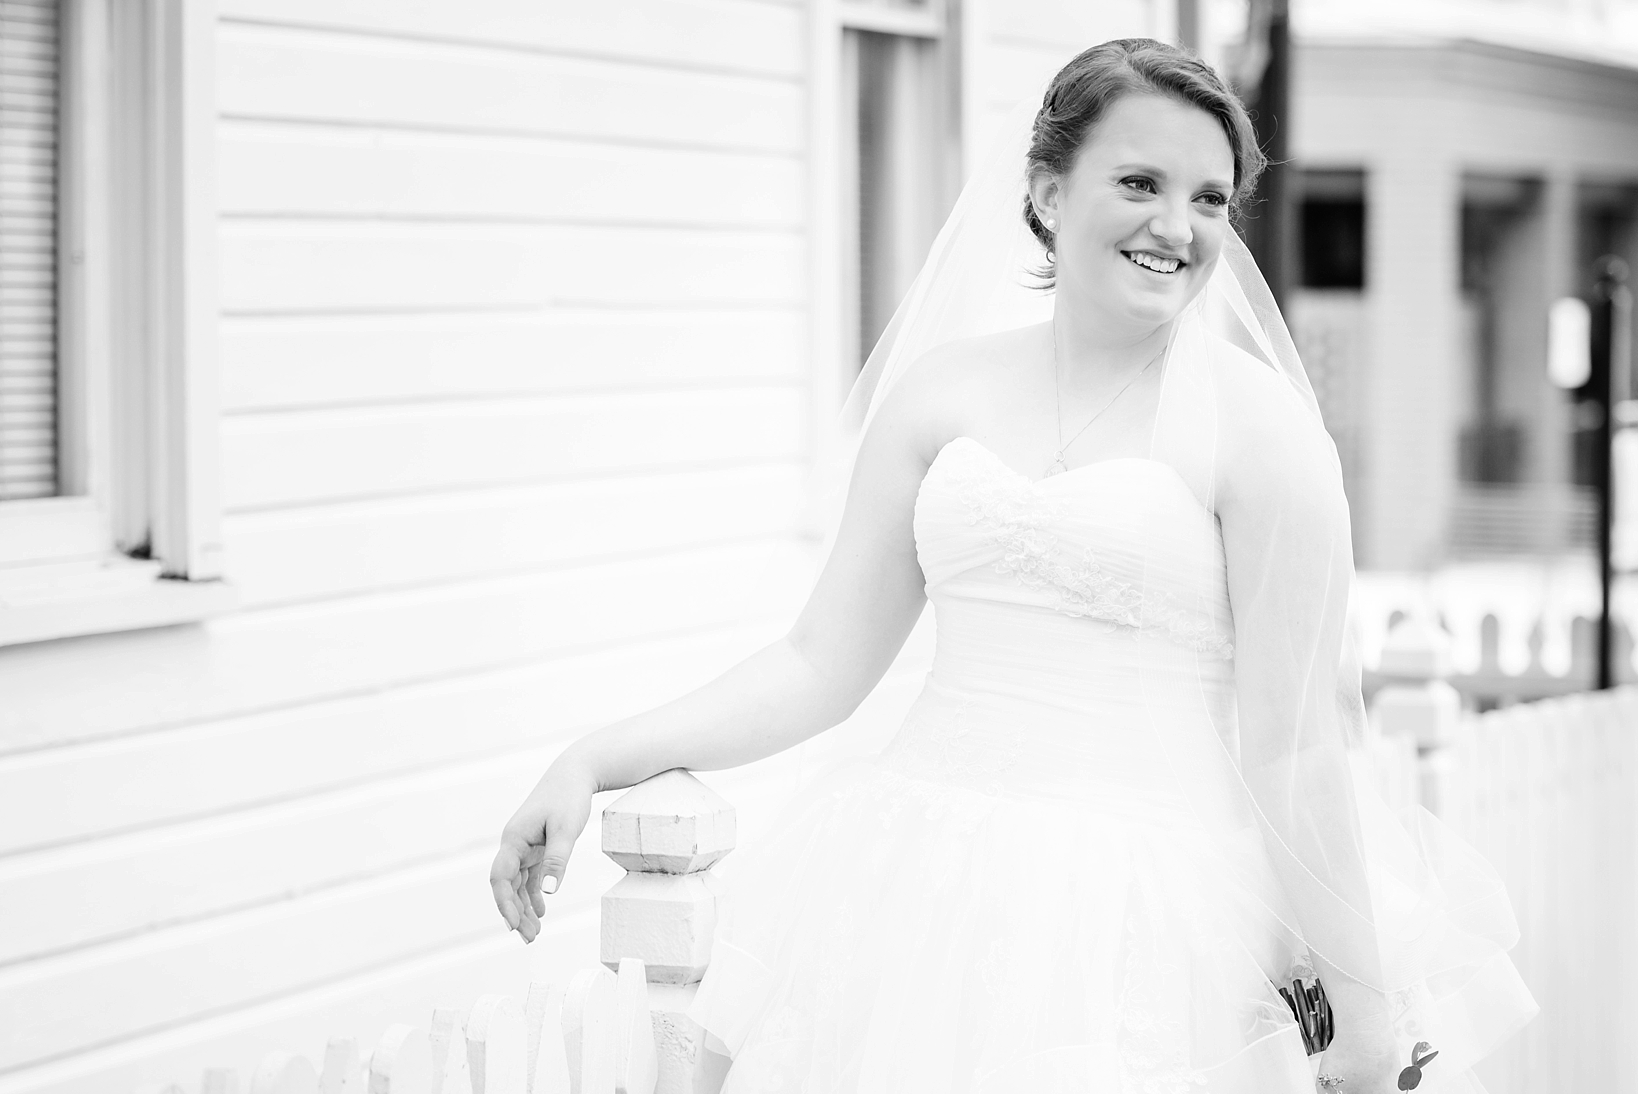 Bride leaning against a white fence in her wedding dress